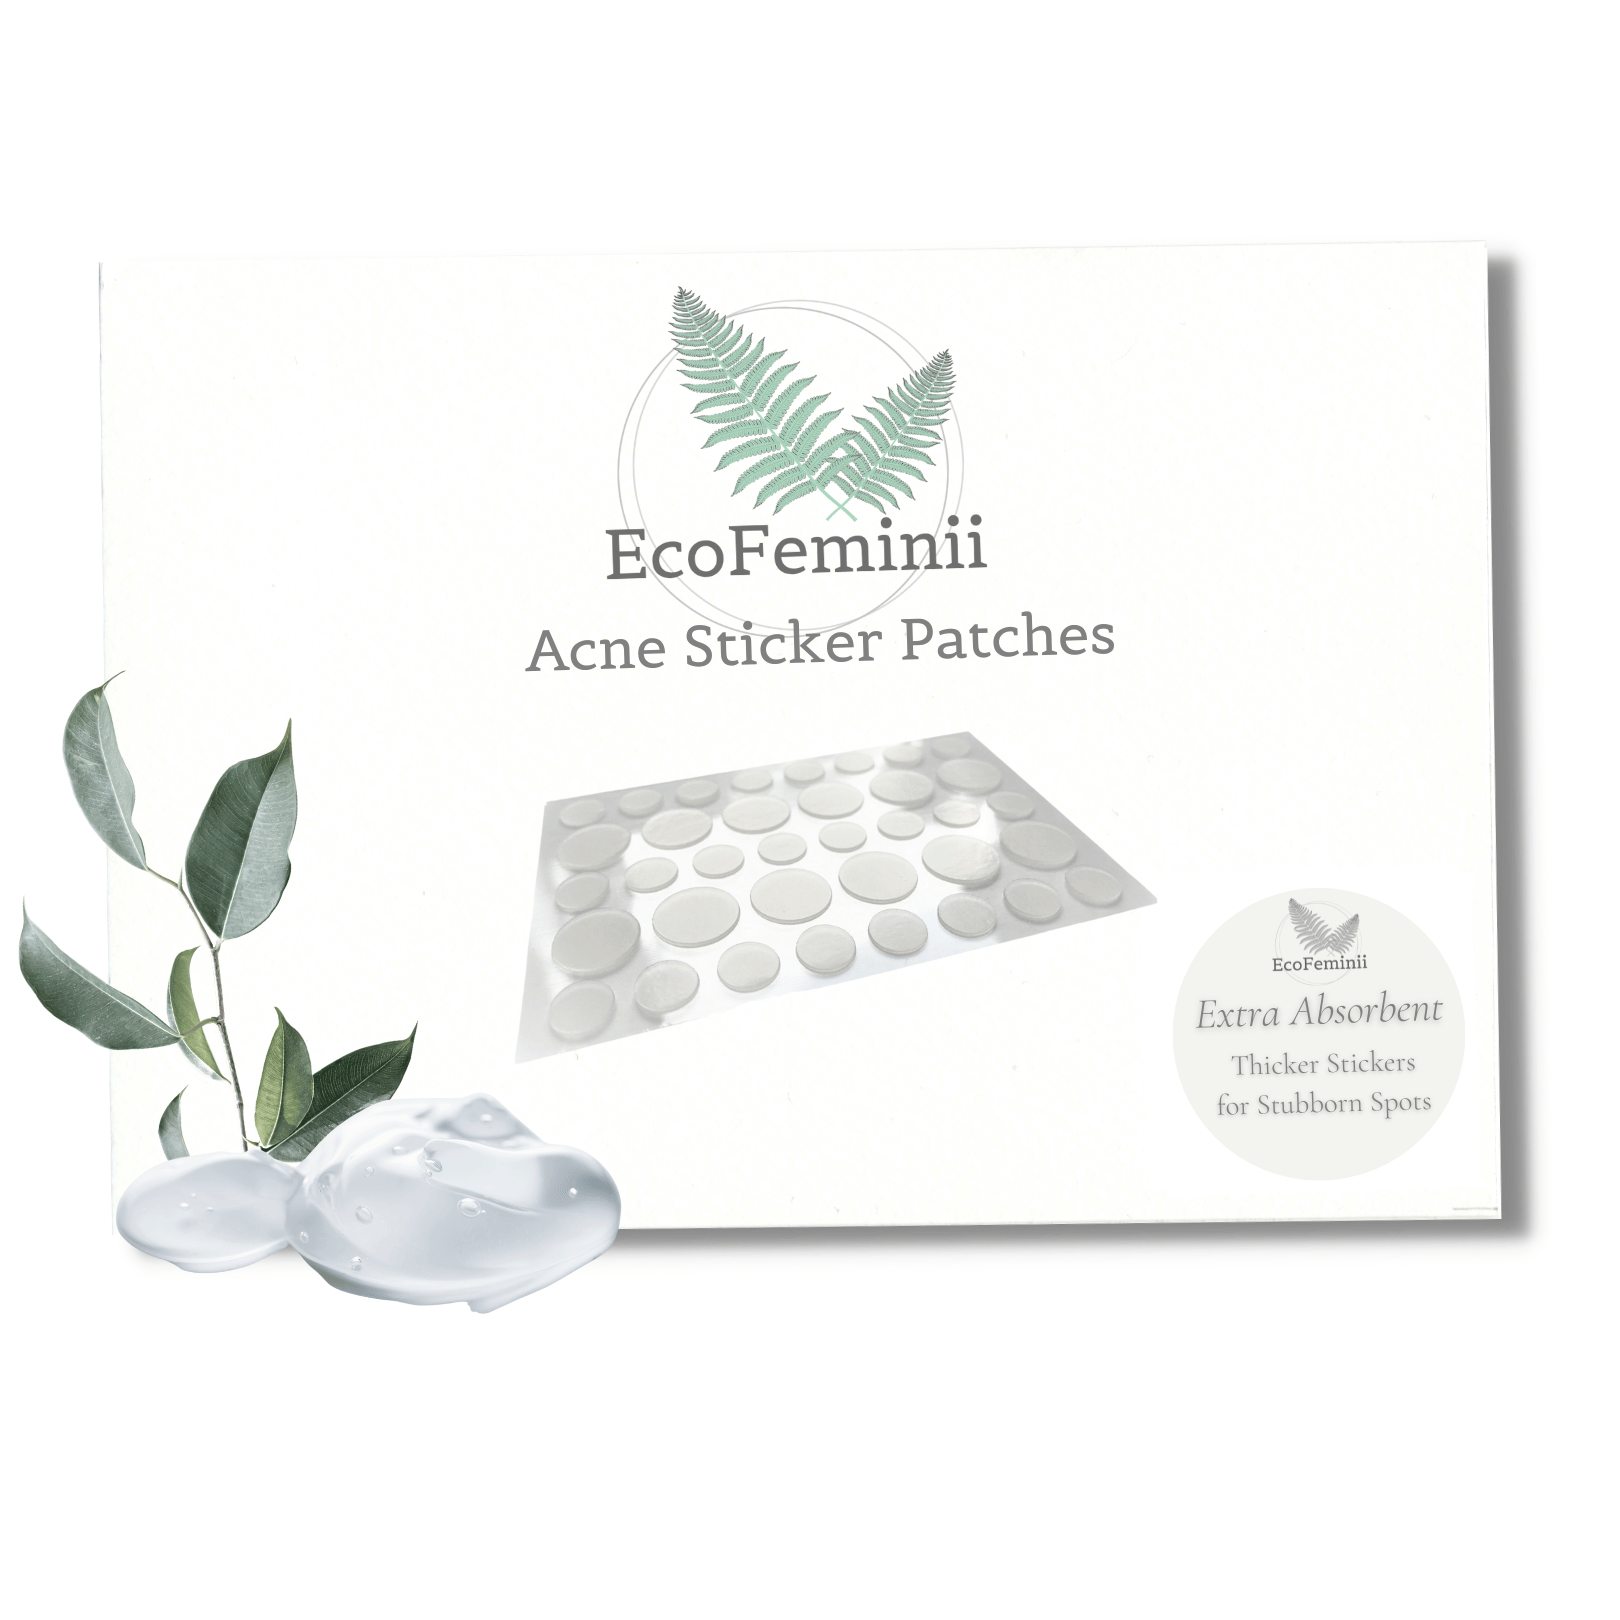  THIN, TRANSLUCENT &amp; FLEXIBLE: EcoFeminii&#39;s original sticker patches can be worn discreetly as they are almost invisible on any skin tone. They effectively conceal the blemish and extract sebum overnight, making it easier to apply make-up the next day.